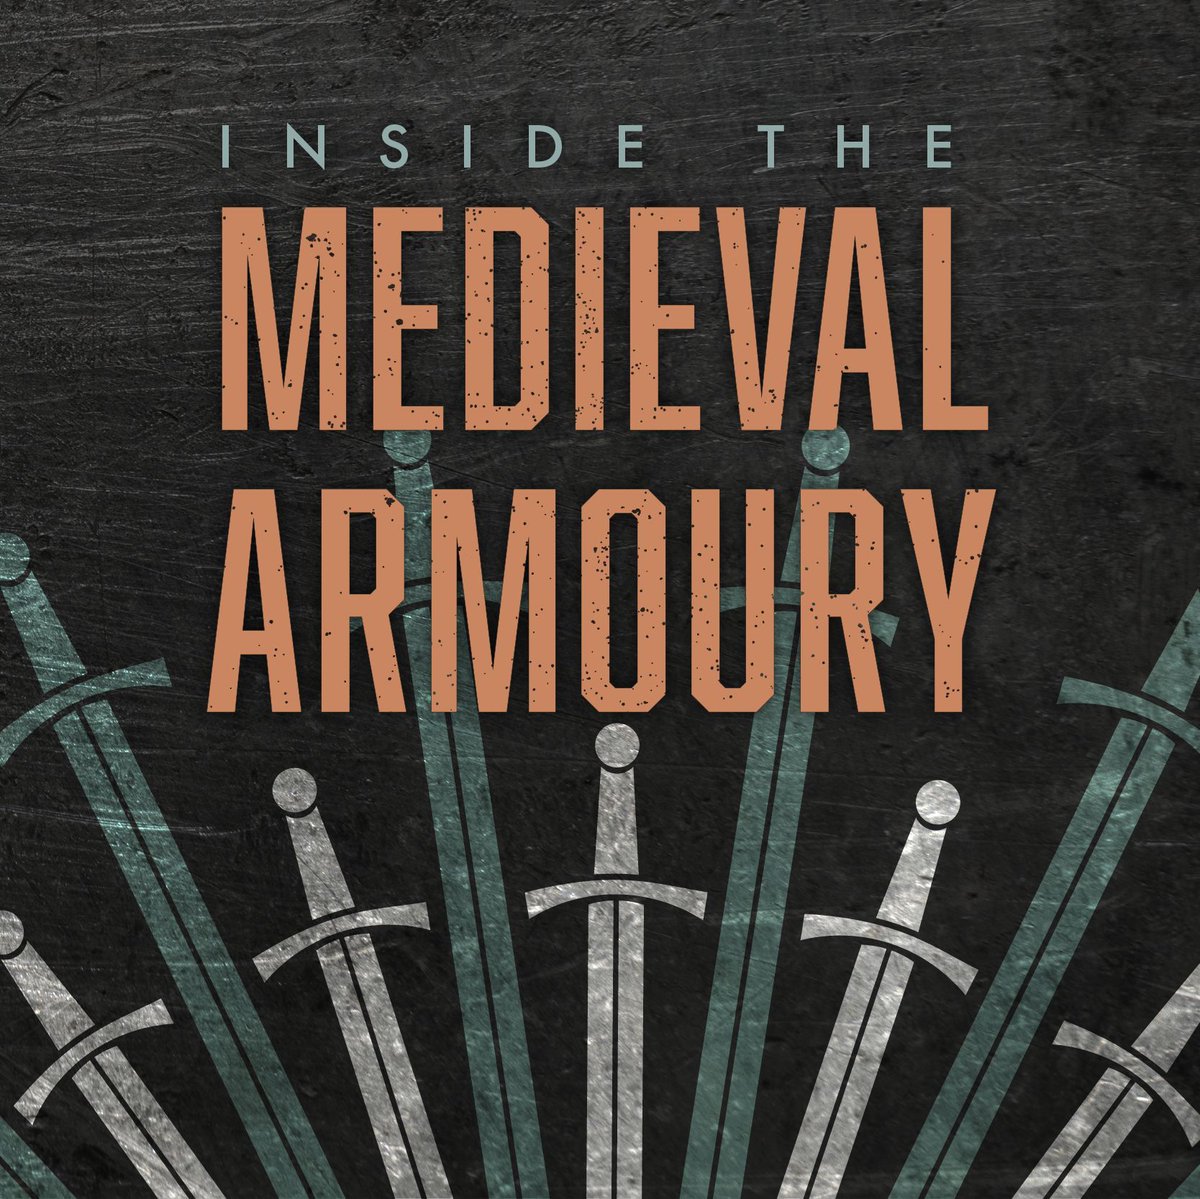 Our medieval armoury is open! We're celebrating craftsmanship, swordsmanship, strategy and spectacle. Step inside... buff.ly/3WcyvH7 #Medieval #MilitaryHistory #HEMA